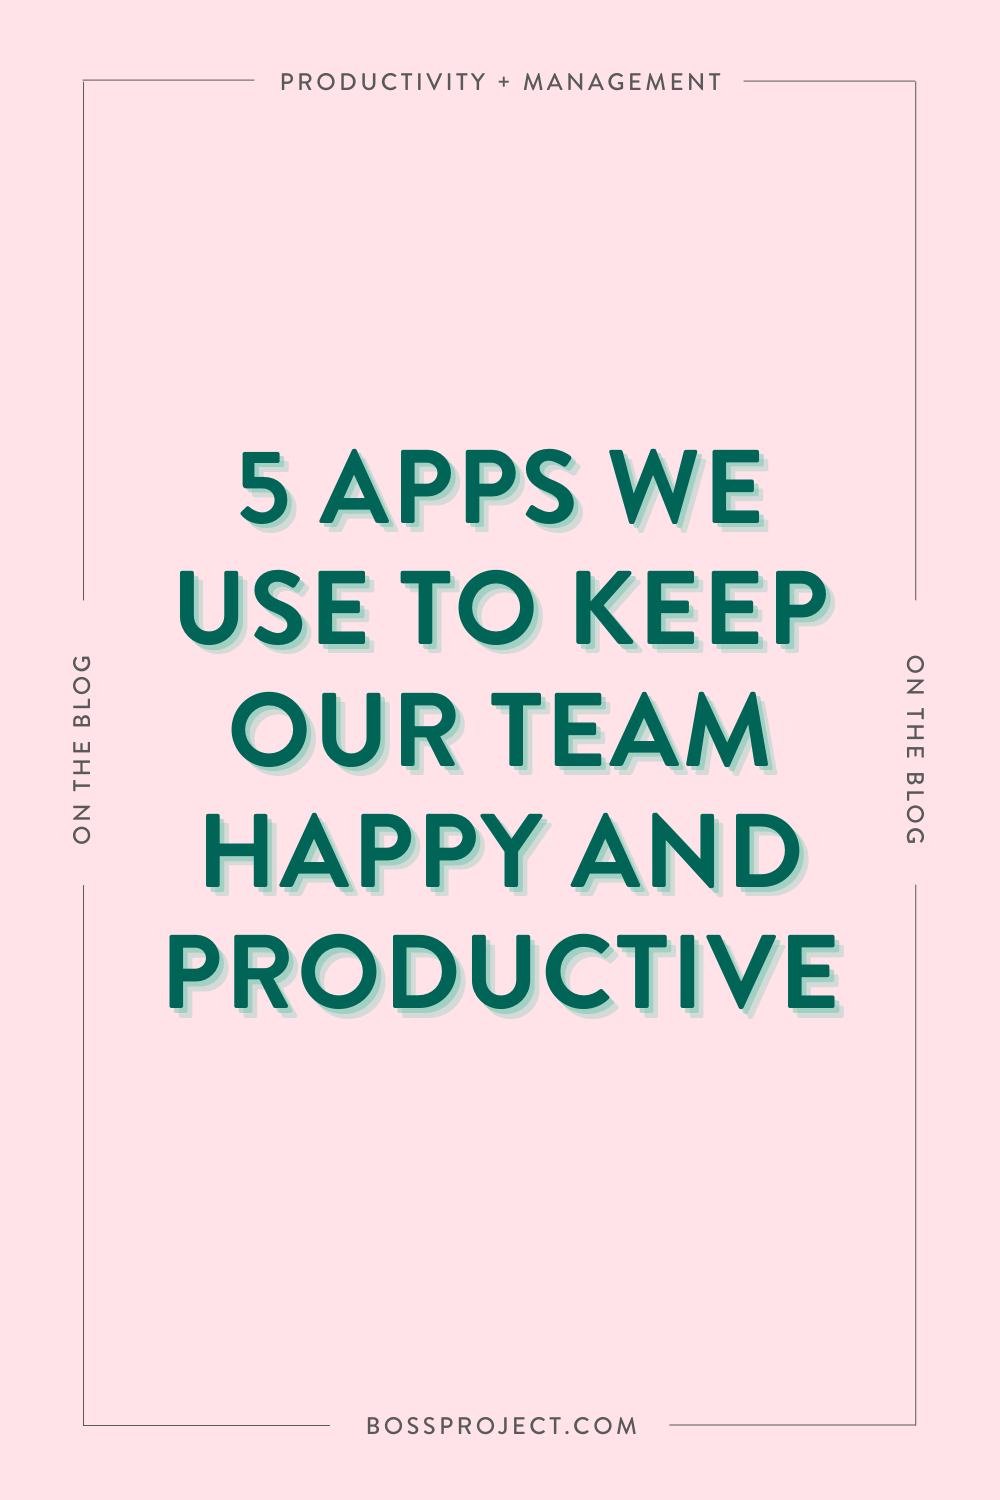 5 Apps We Use to Keep our Team Happy and Productive